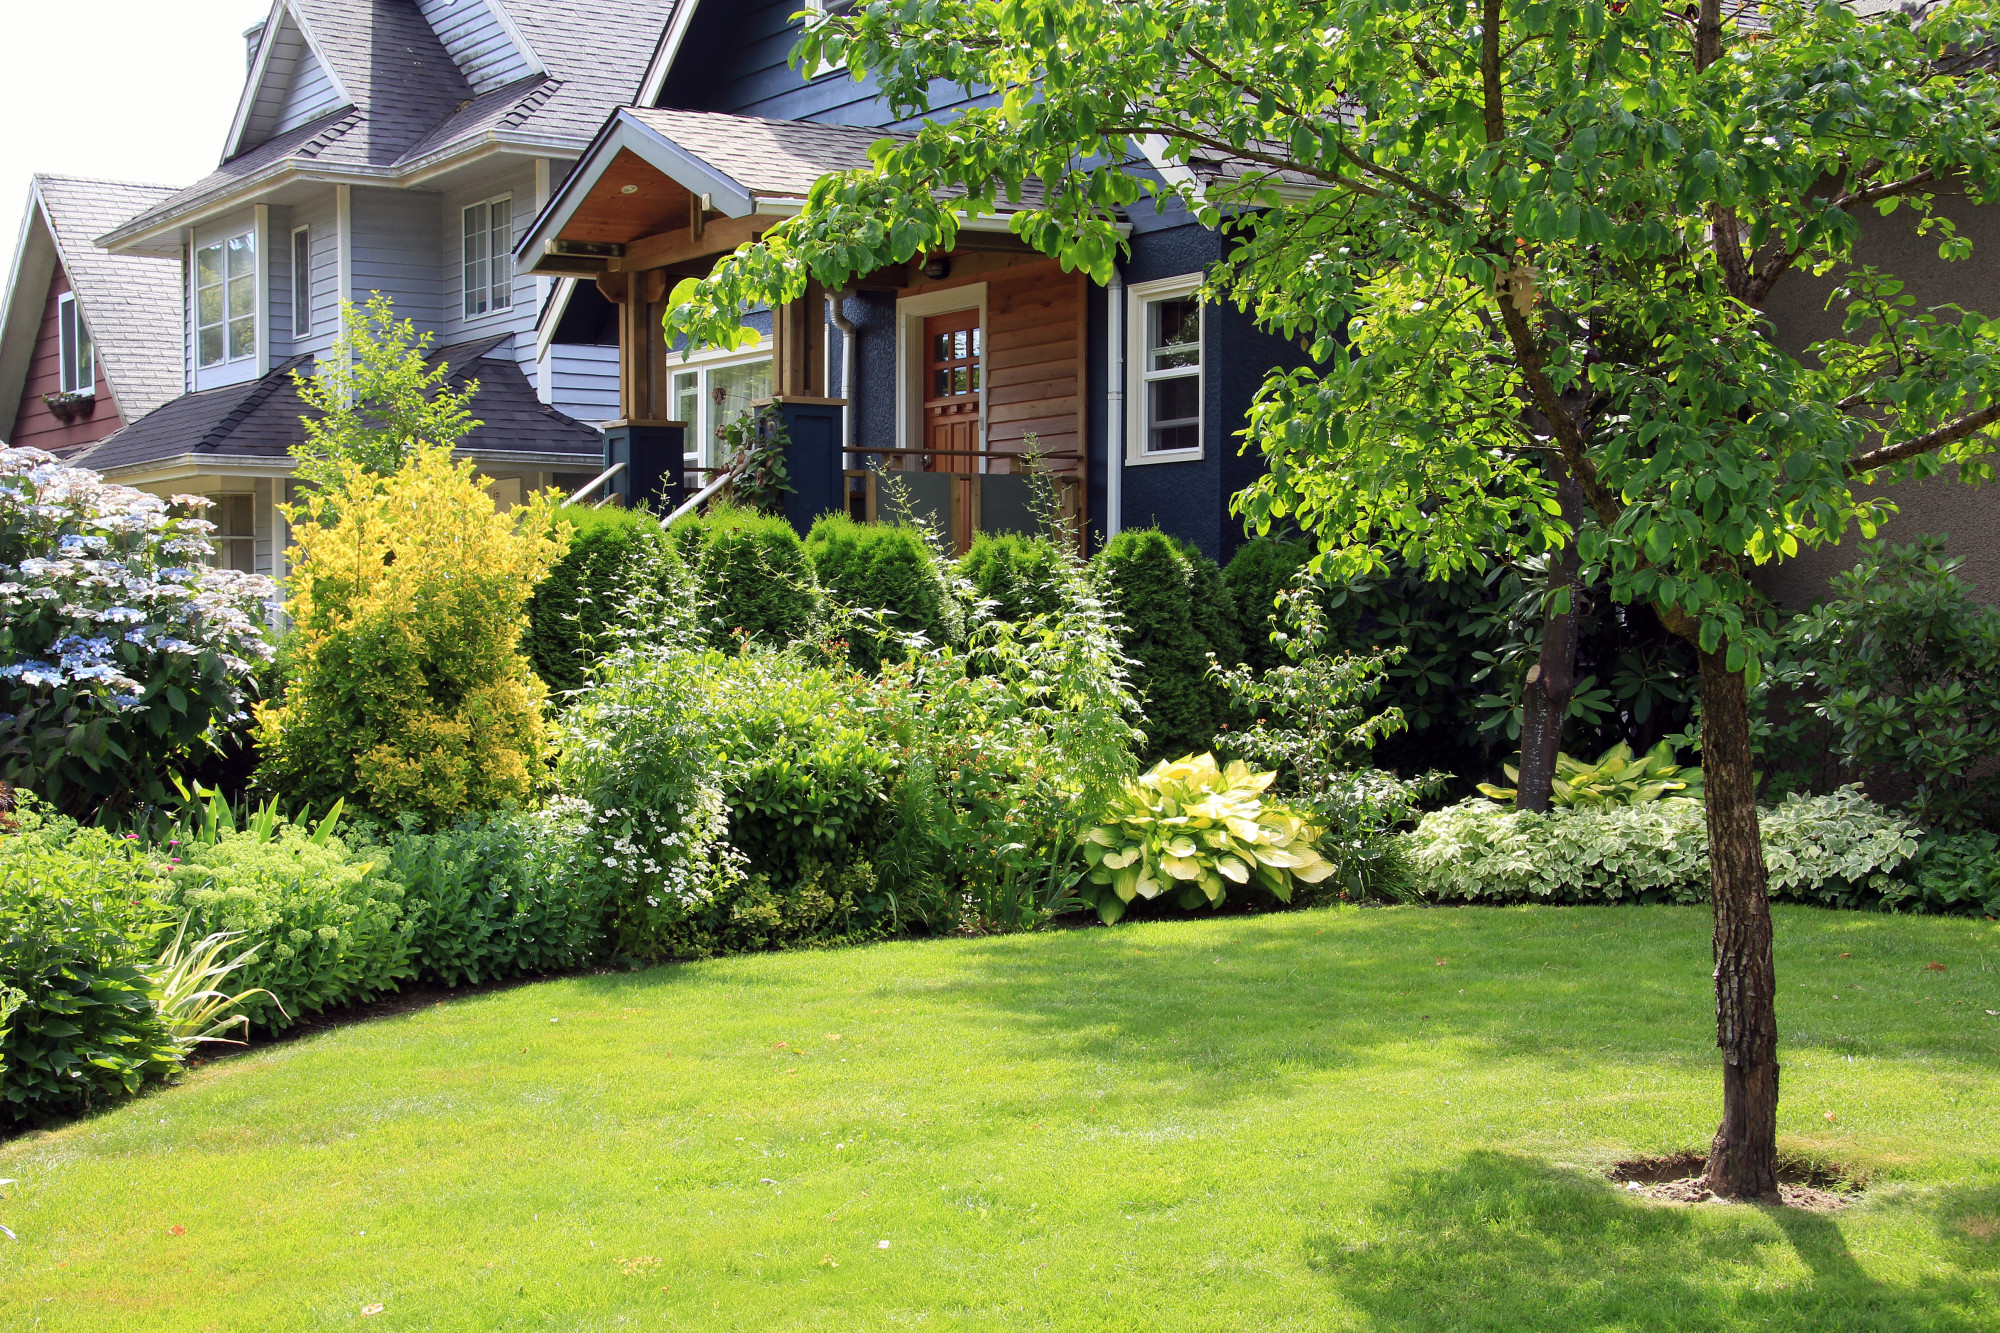 You want your lawn to look as good as it can. Here are some weed control tips that will help you keep your lawn healthy.